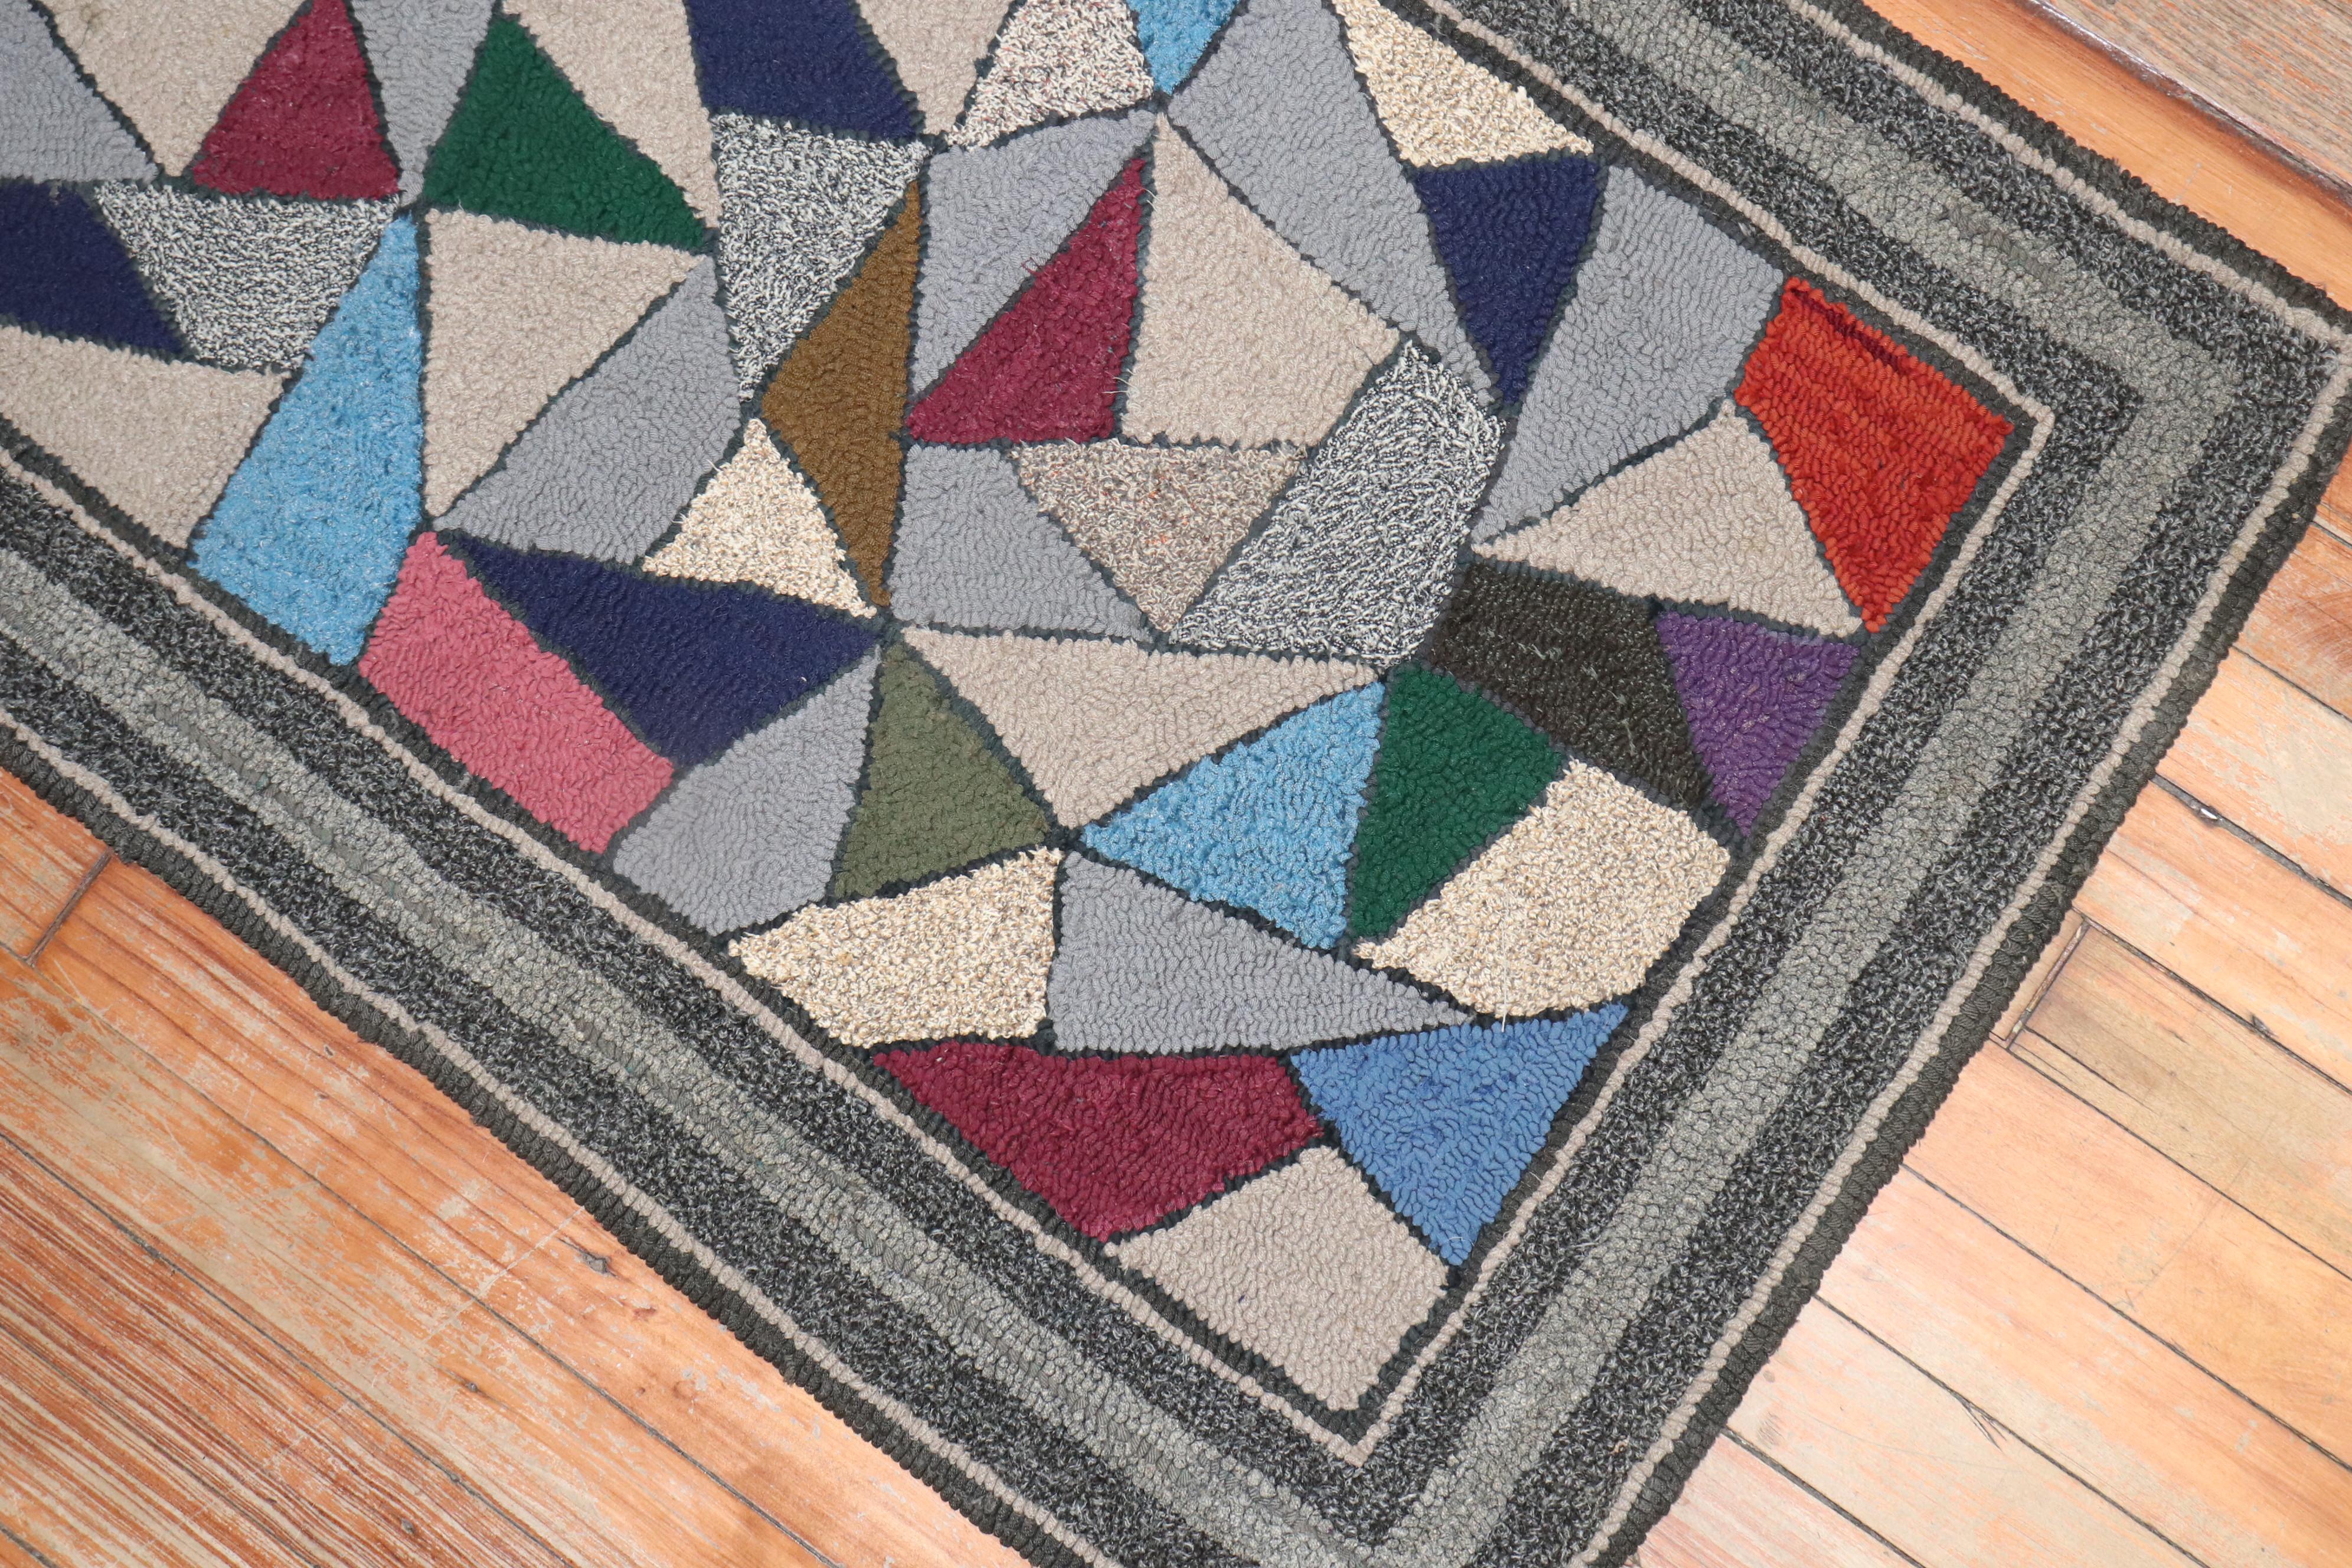 Hand-Woven American Stained Glass Hooked Throw Rug For Sale